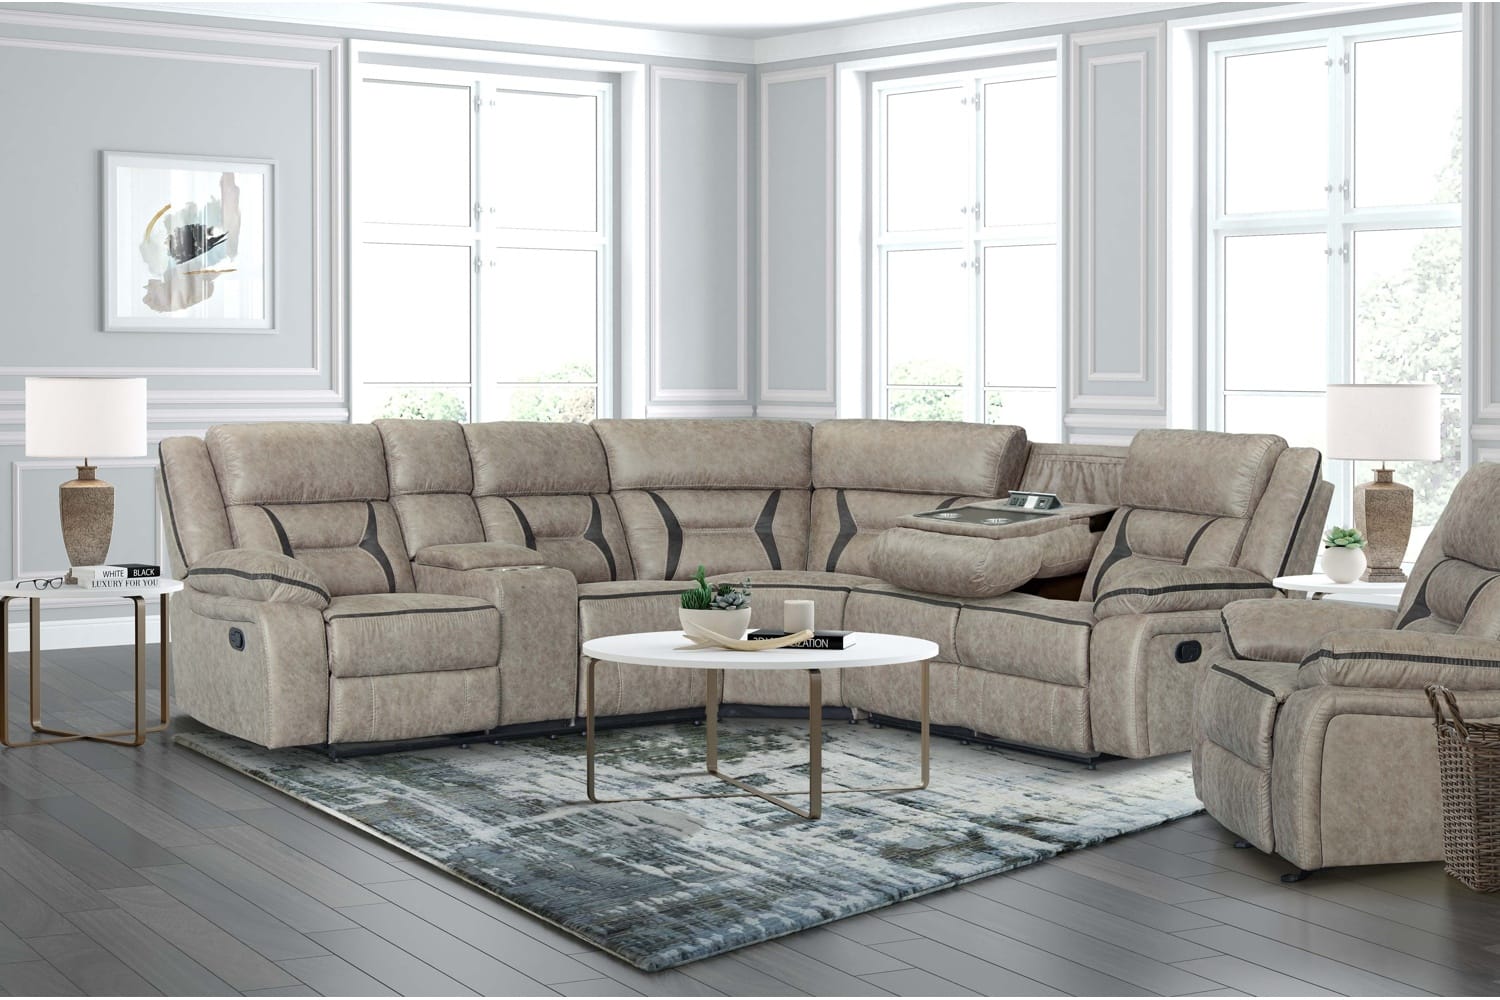 Acropolis Taupe Reclining 3 Piece